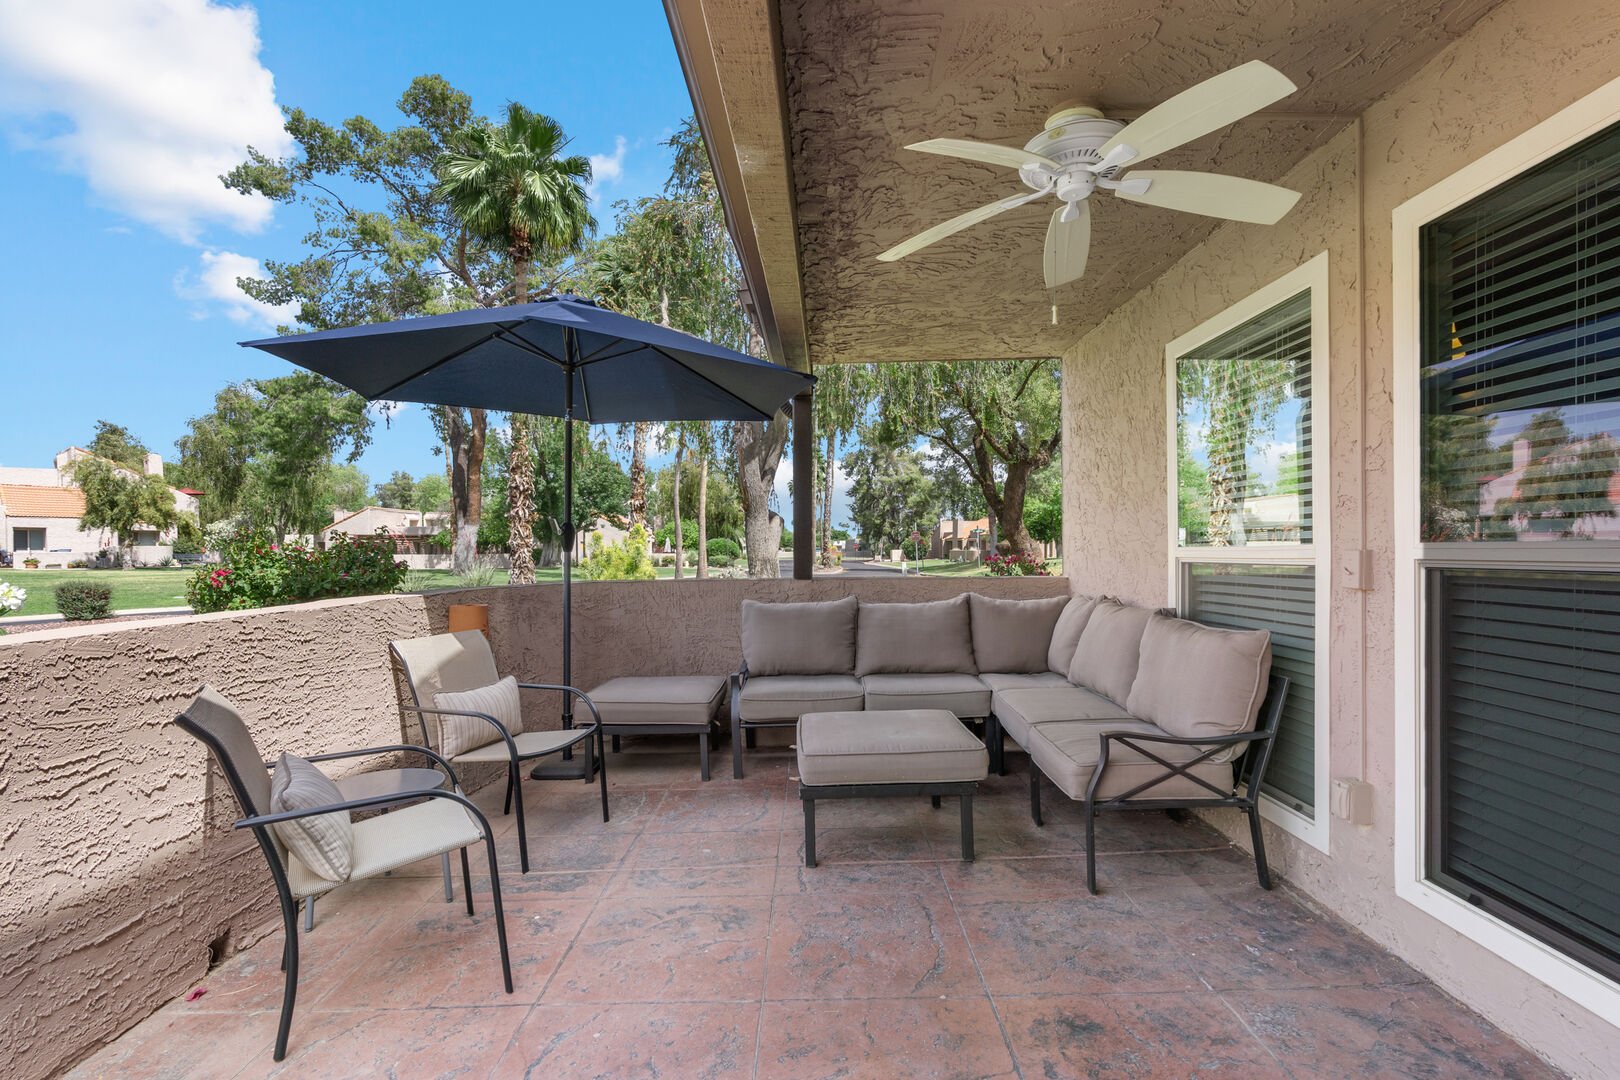 Lounge on the comfy outdoor seating area, the ceiling fan is a plus!